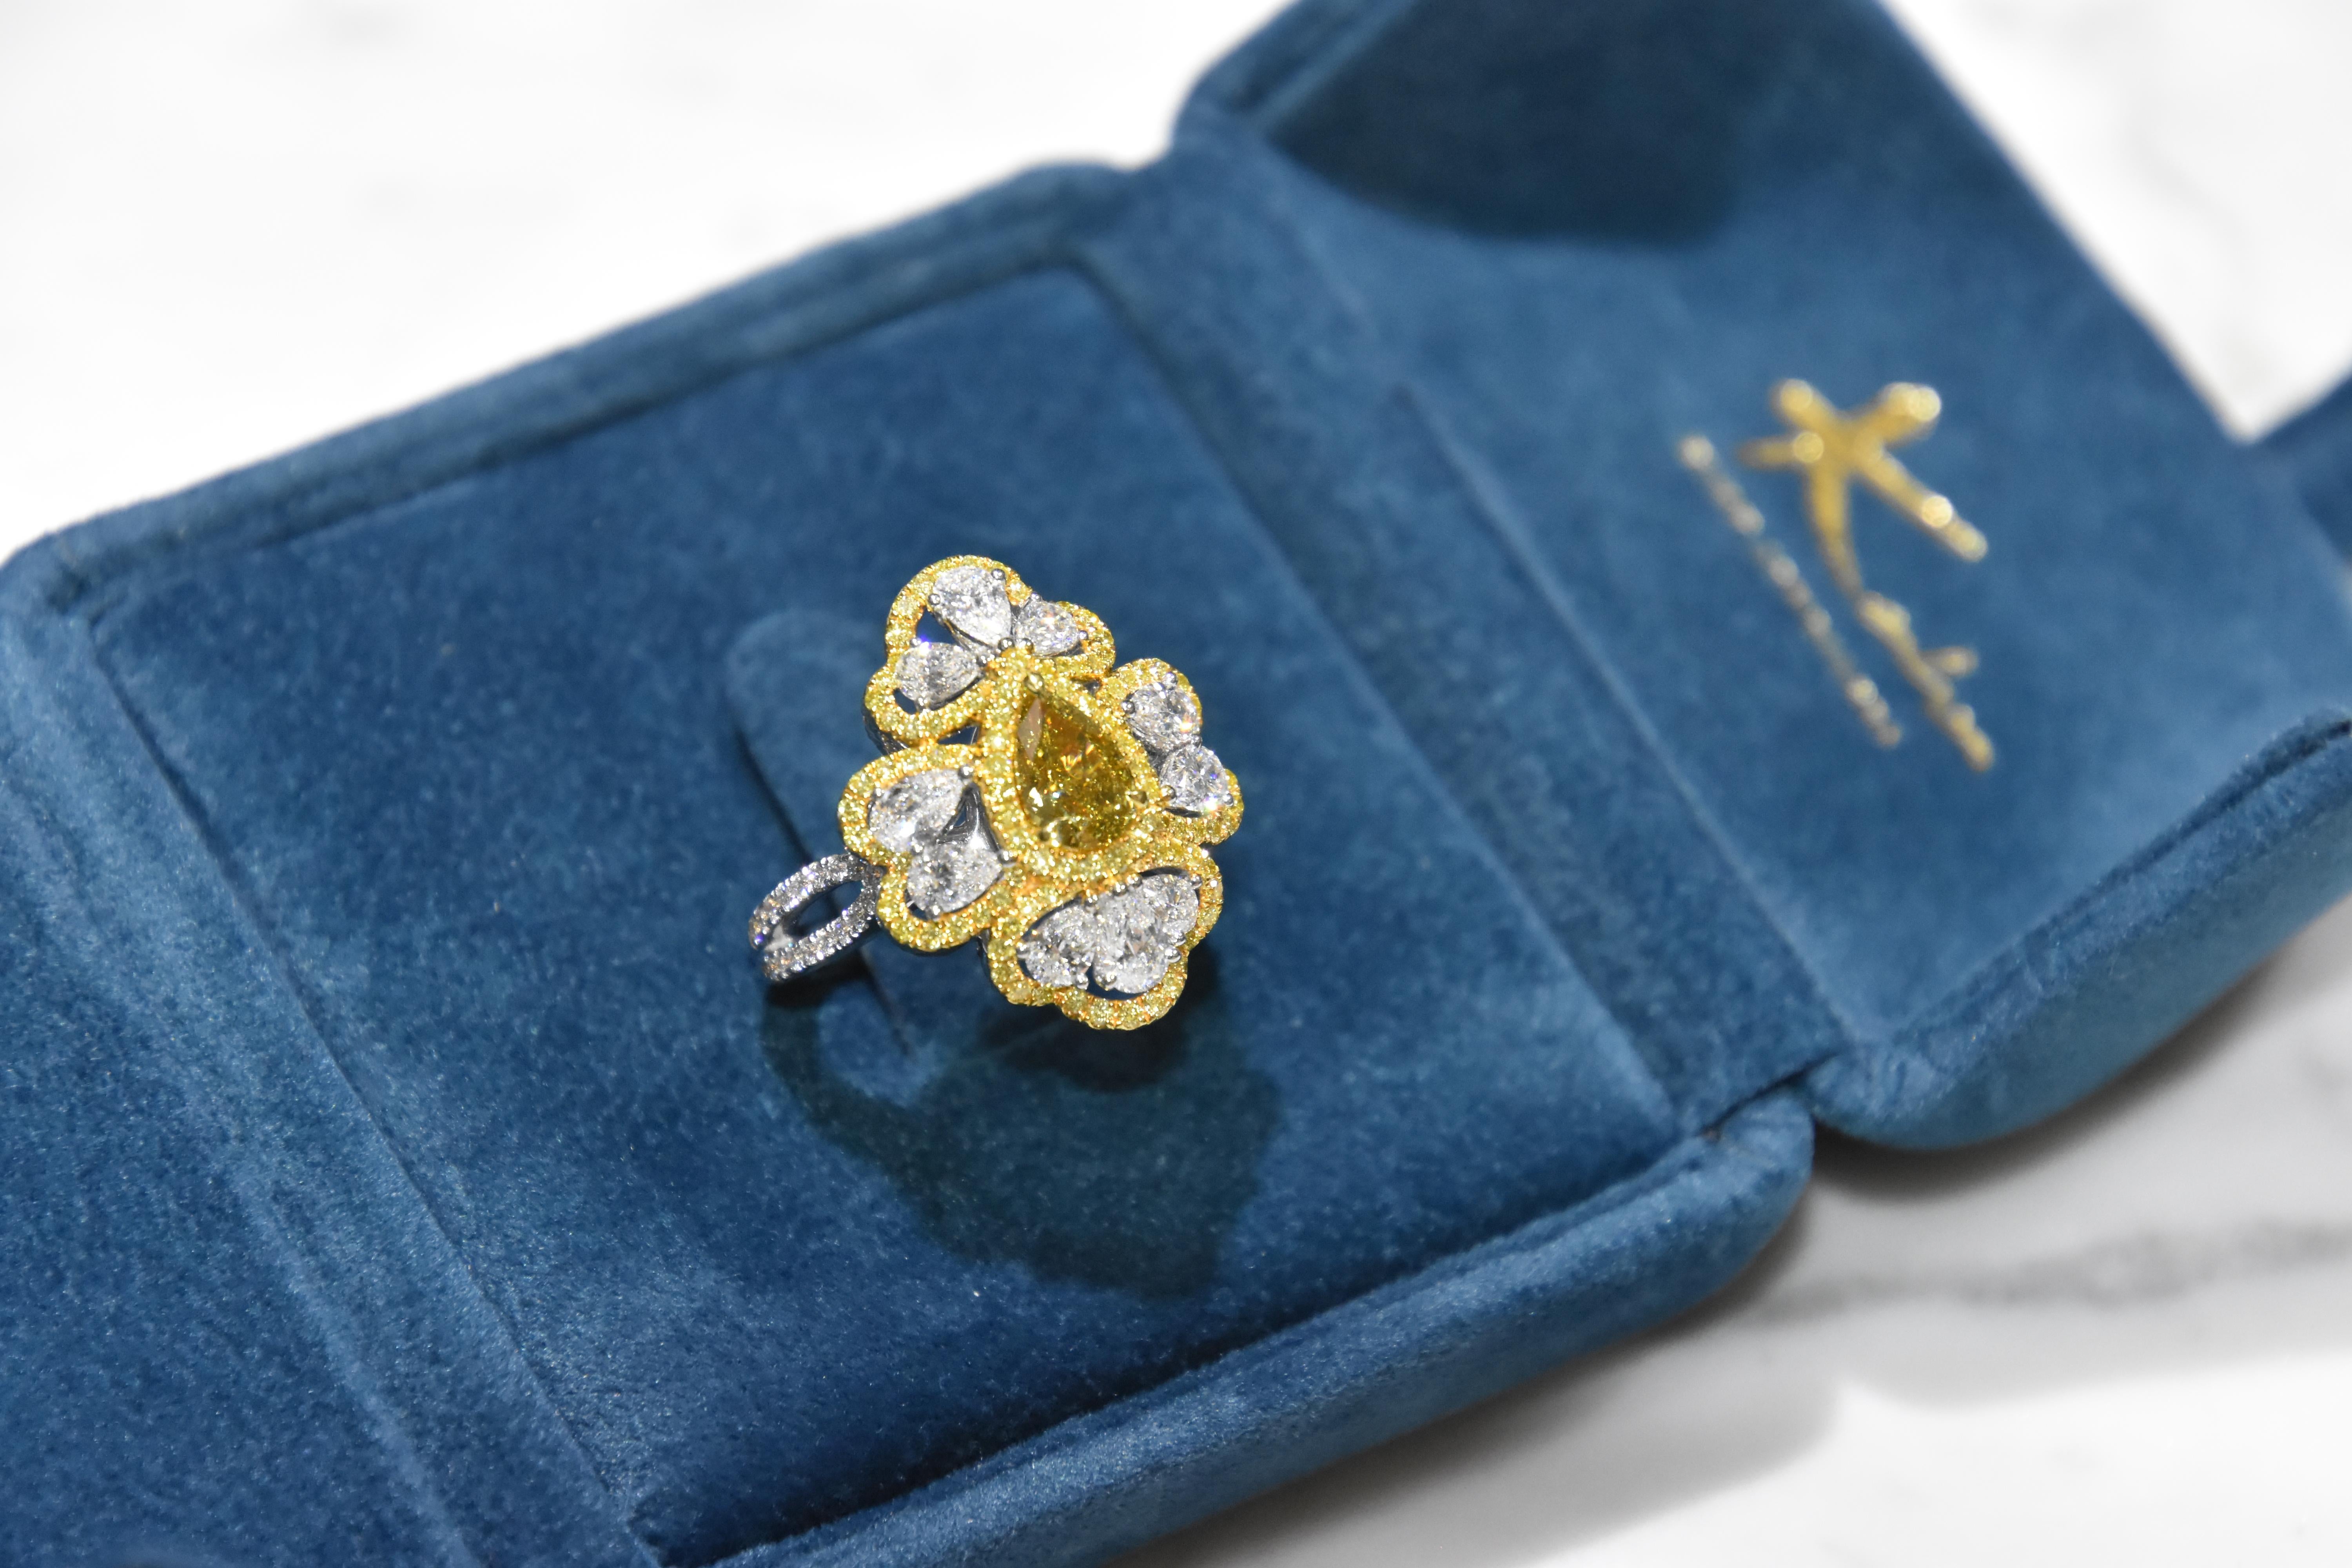 Featuring a 1.03 carat pear shape Fancy yellow diamond with white pear shape diamond finished in white gold. 
Center stone certified by world wide known GIA institution. (1179264159)

Ring size- US 6.5,   Kahn also provide engraving, resizing and